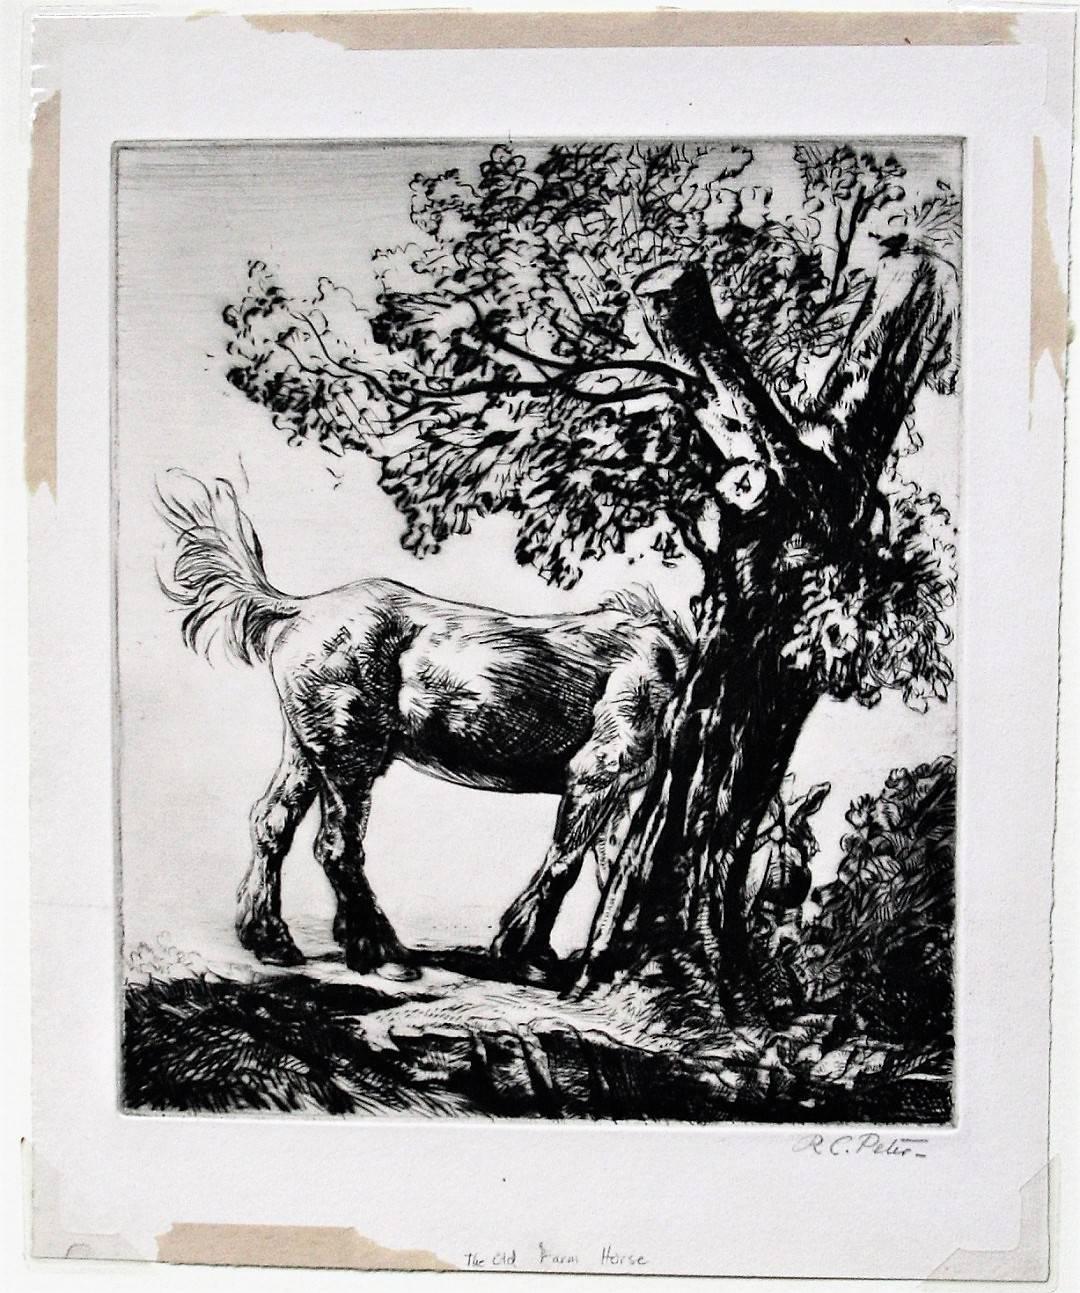 The Old Farm Horse.  - Print by Robert Charles Peter